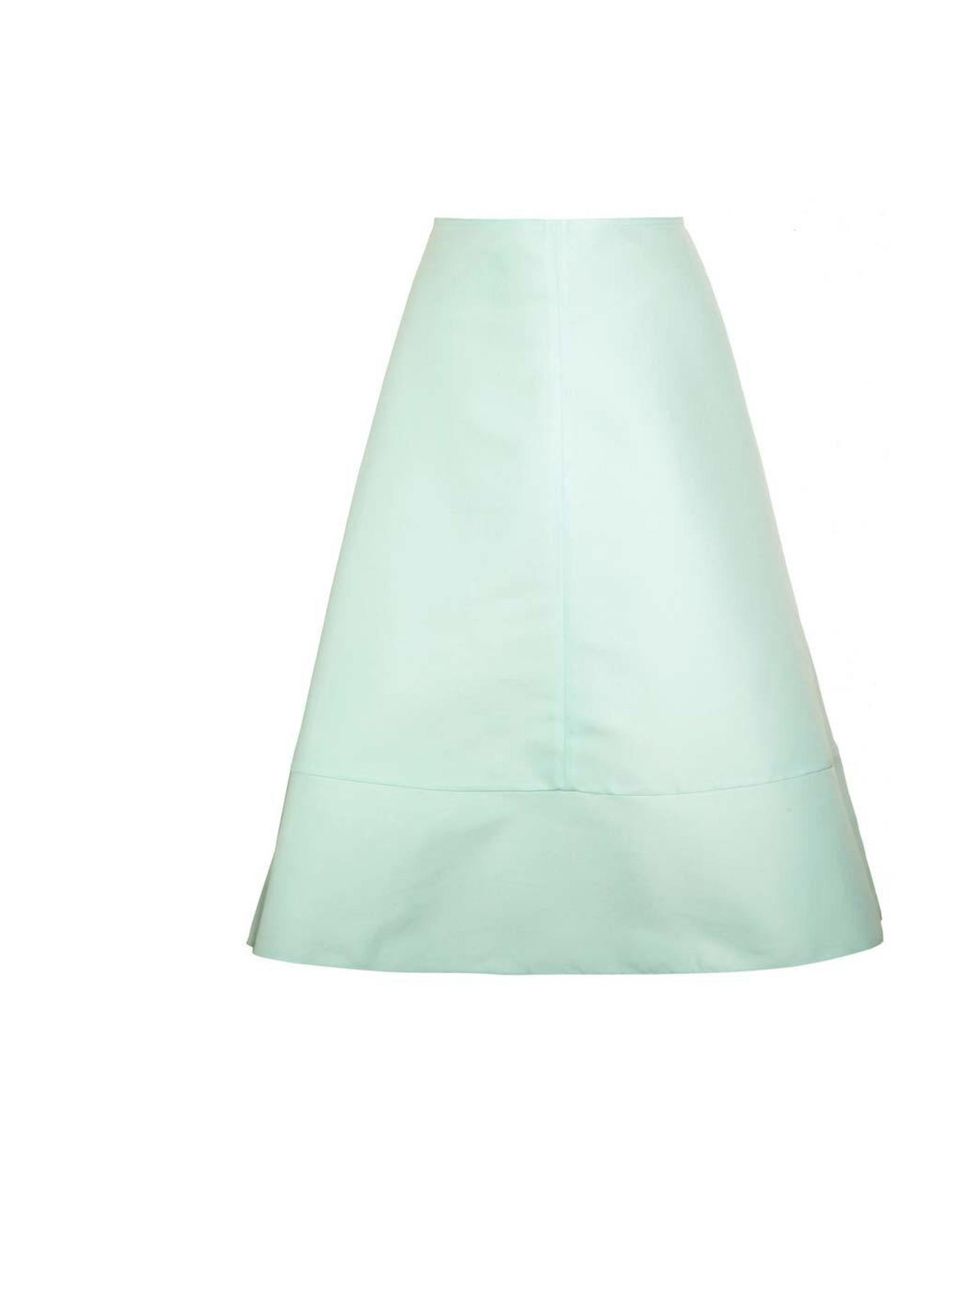 <p>The colour of this skirt feels so fresh and right for Spring time. The soft organza is romantic but the graphic shape keeps it modern.</p><p>Marni Cotton Silk Organdy Pleated Skirt, £720 at <a href="http://www.luisaviaroma.com/index.aspx">Luisa Via Rom